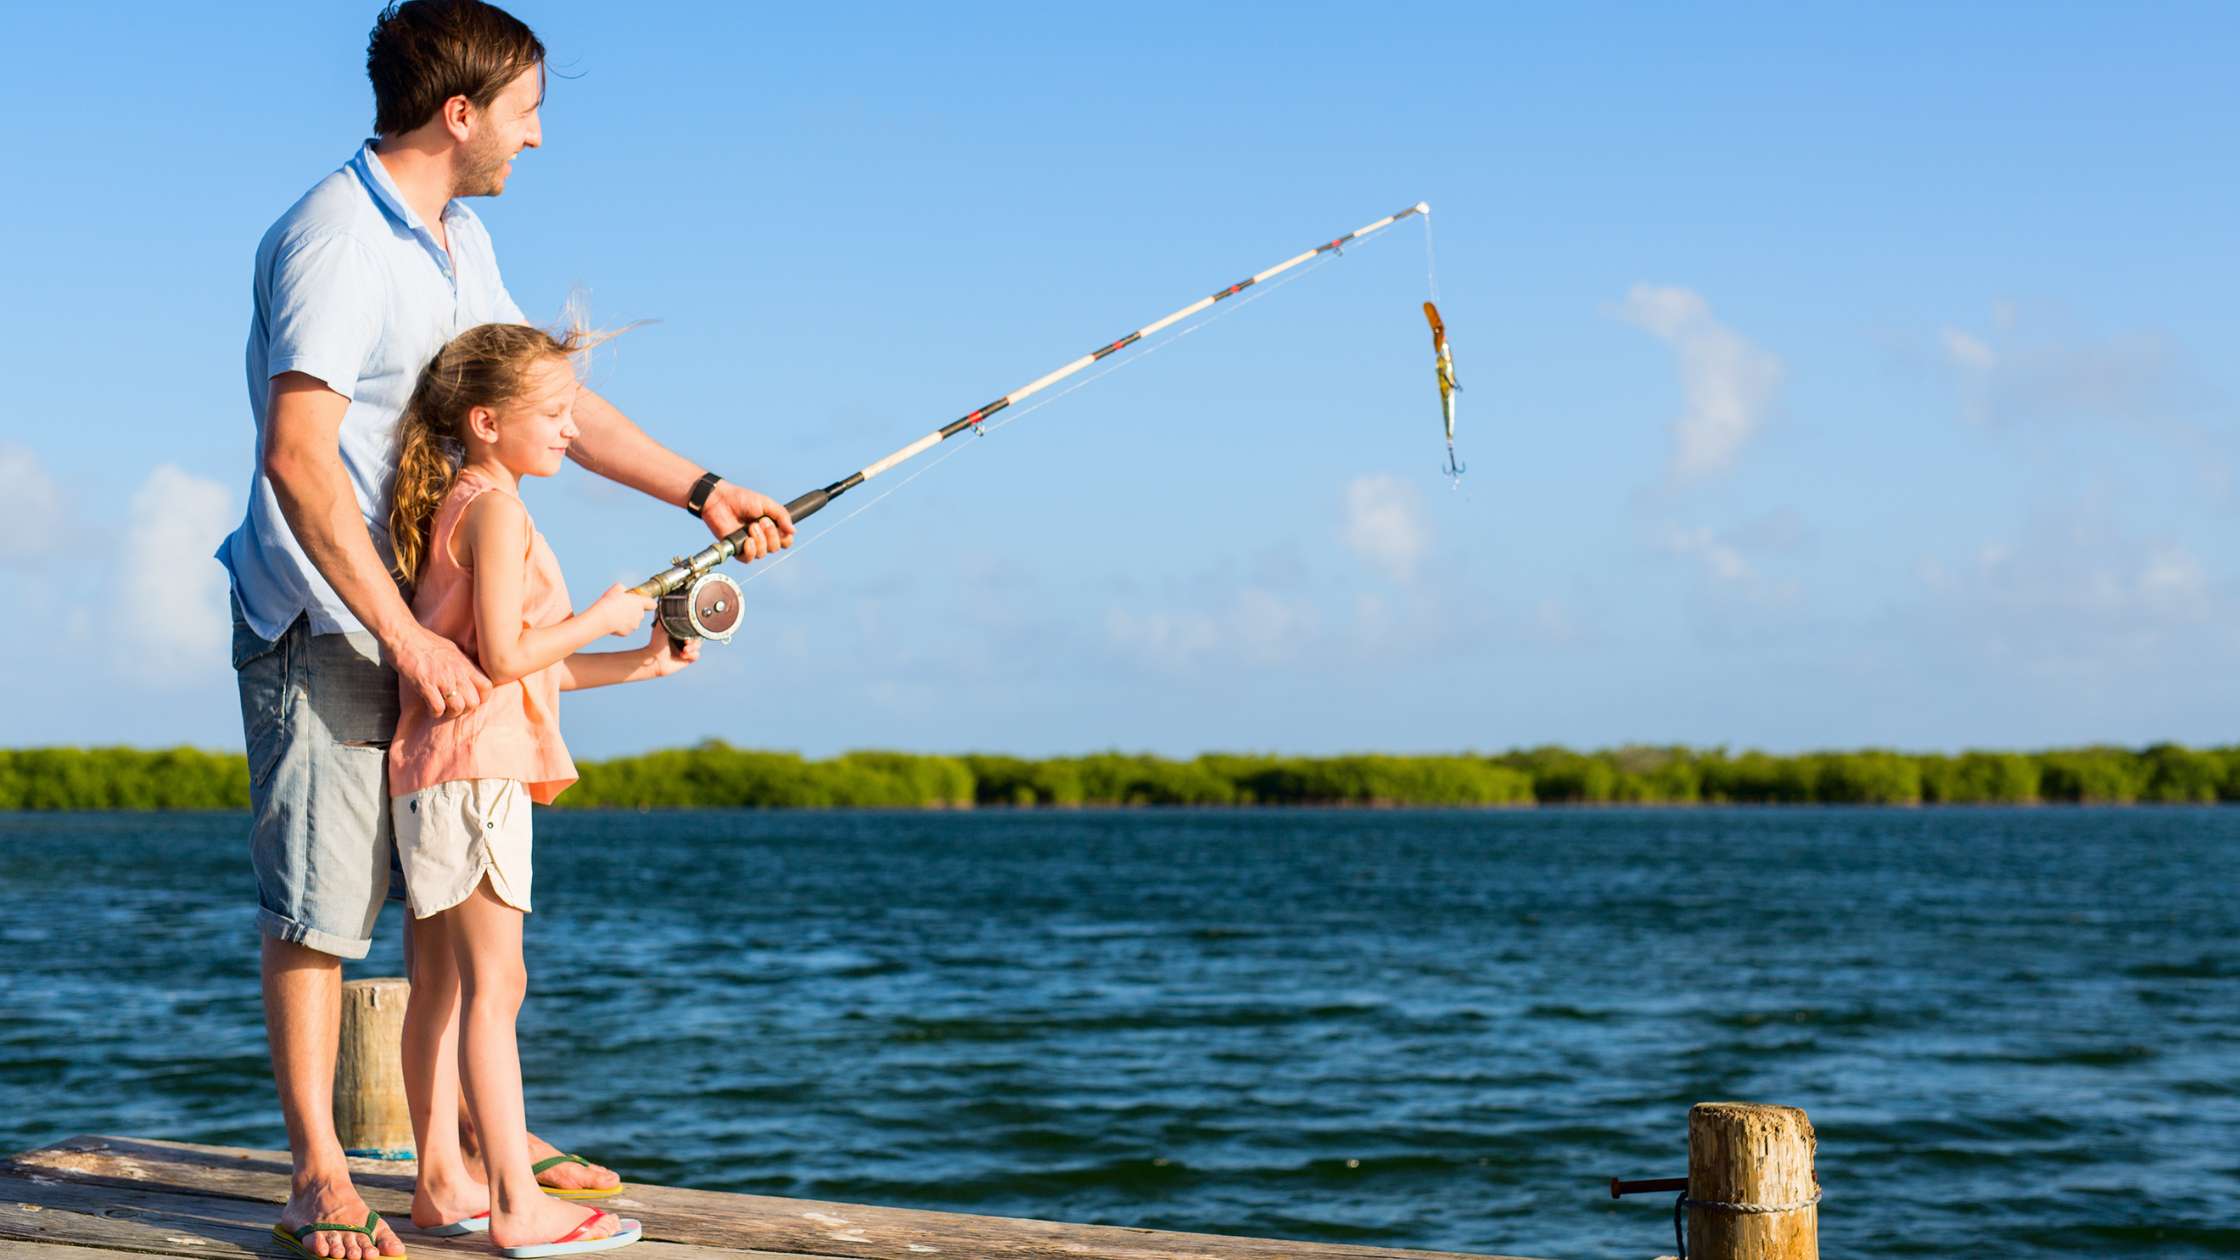 Learning how to shore fish is a fun adventure. Get to know the right gear and equipment to bring for shore fishing to be more enjoyable.